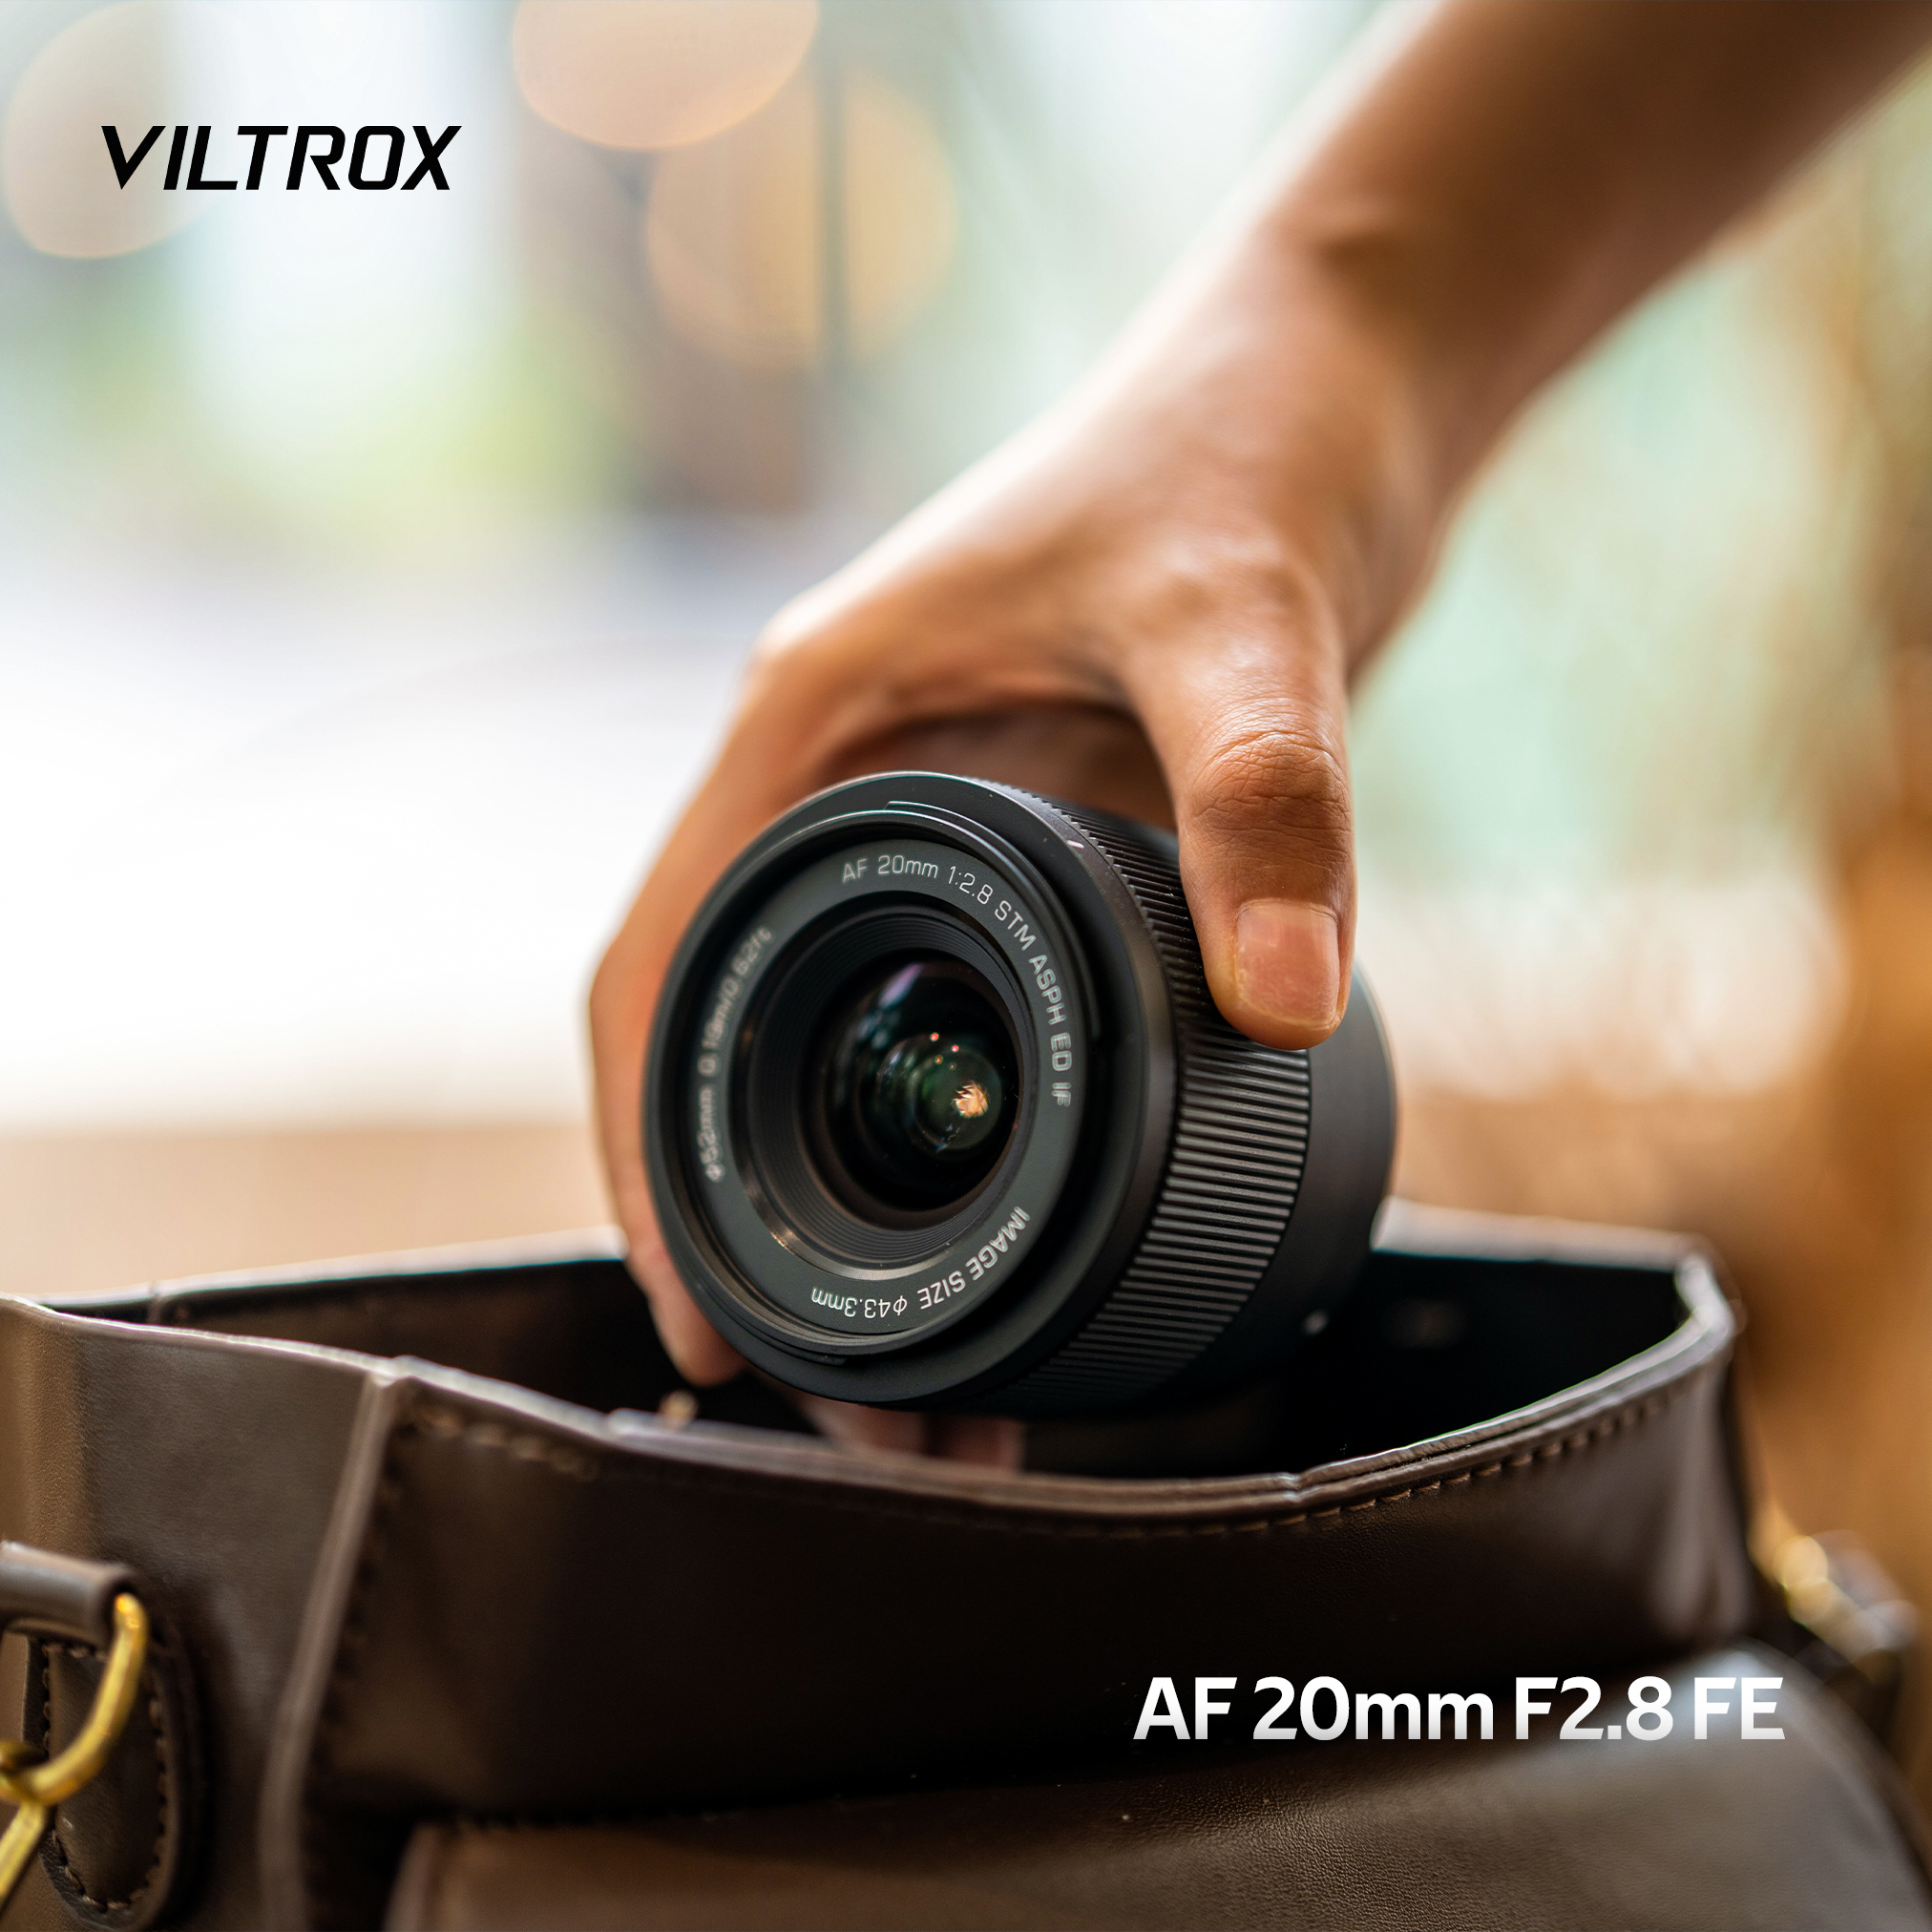 The New Viltrox 20mm f2.8 Lacks a Main Function